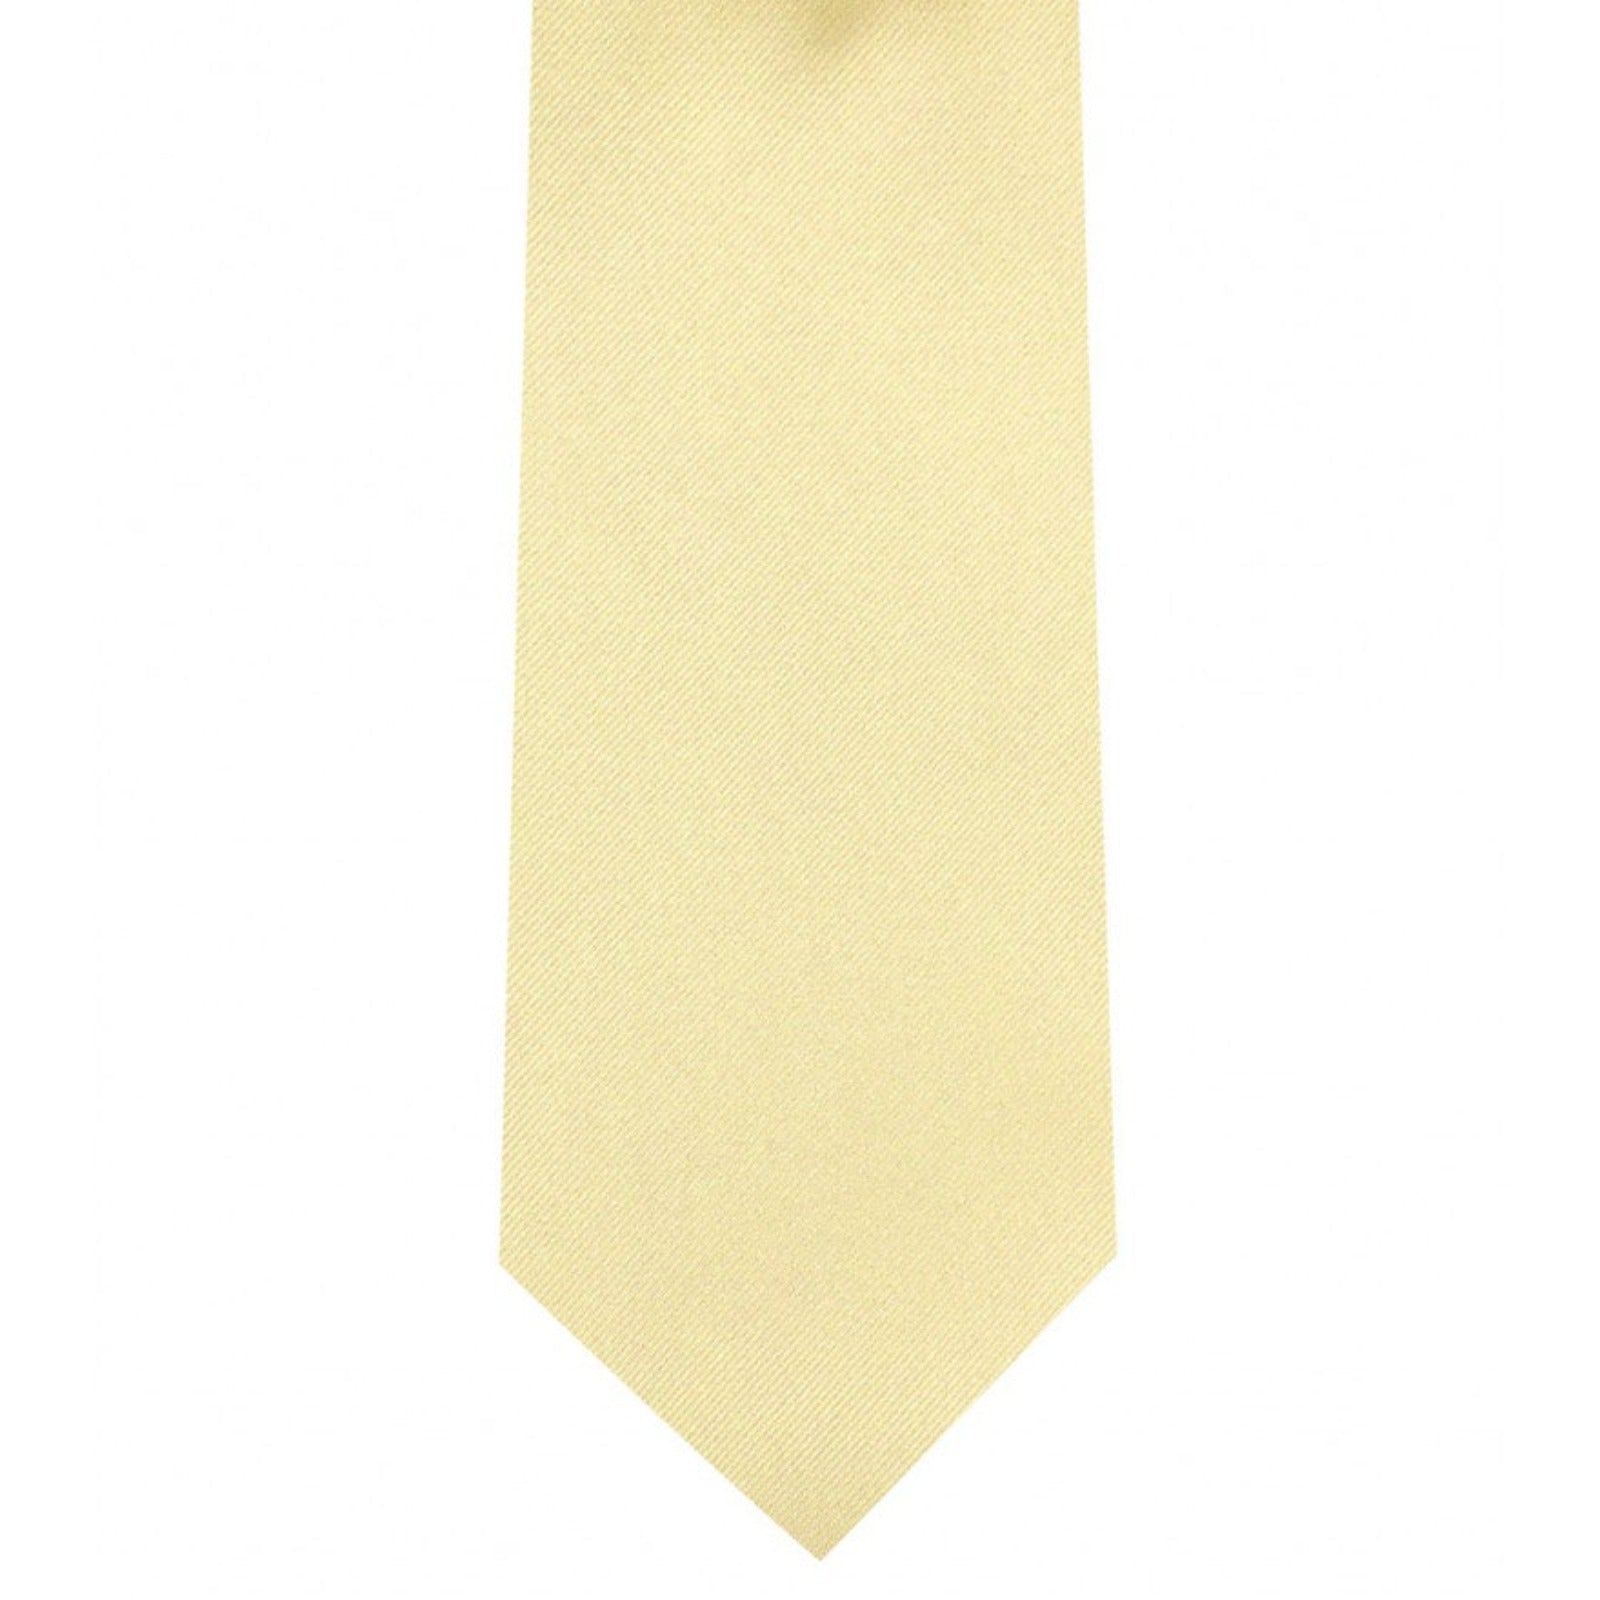 Classic Canary Tie Ultra Skinny tie width 2.25 inches With Matching Pocket Square | KCT Menswear